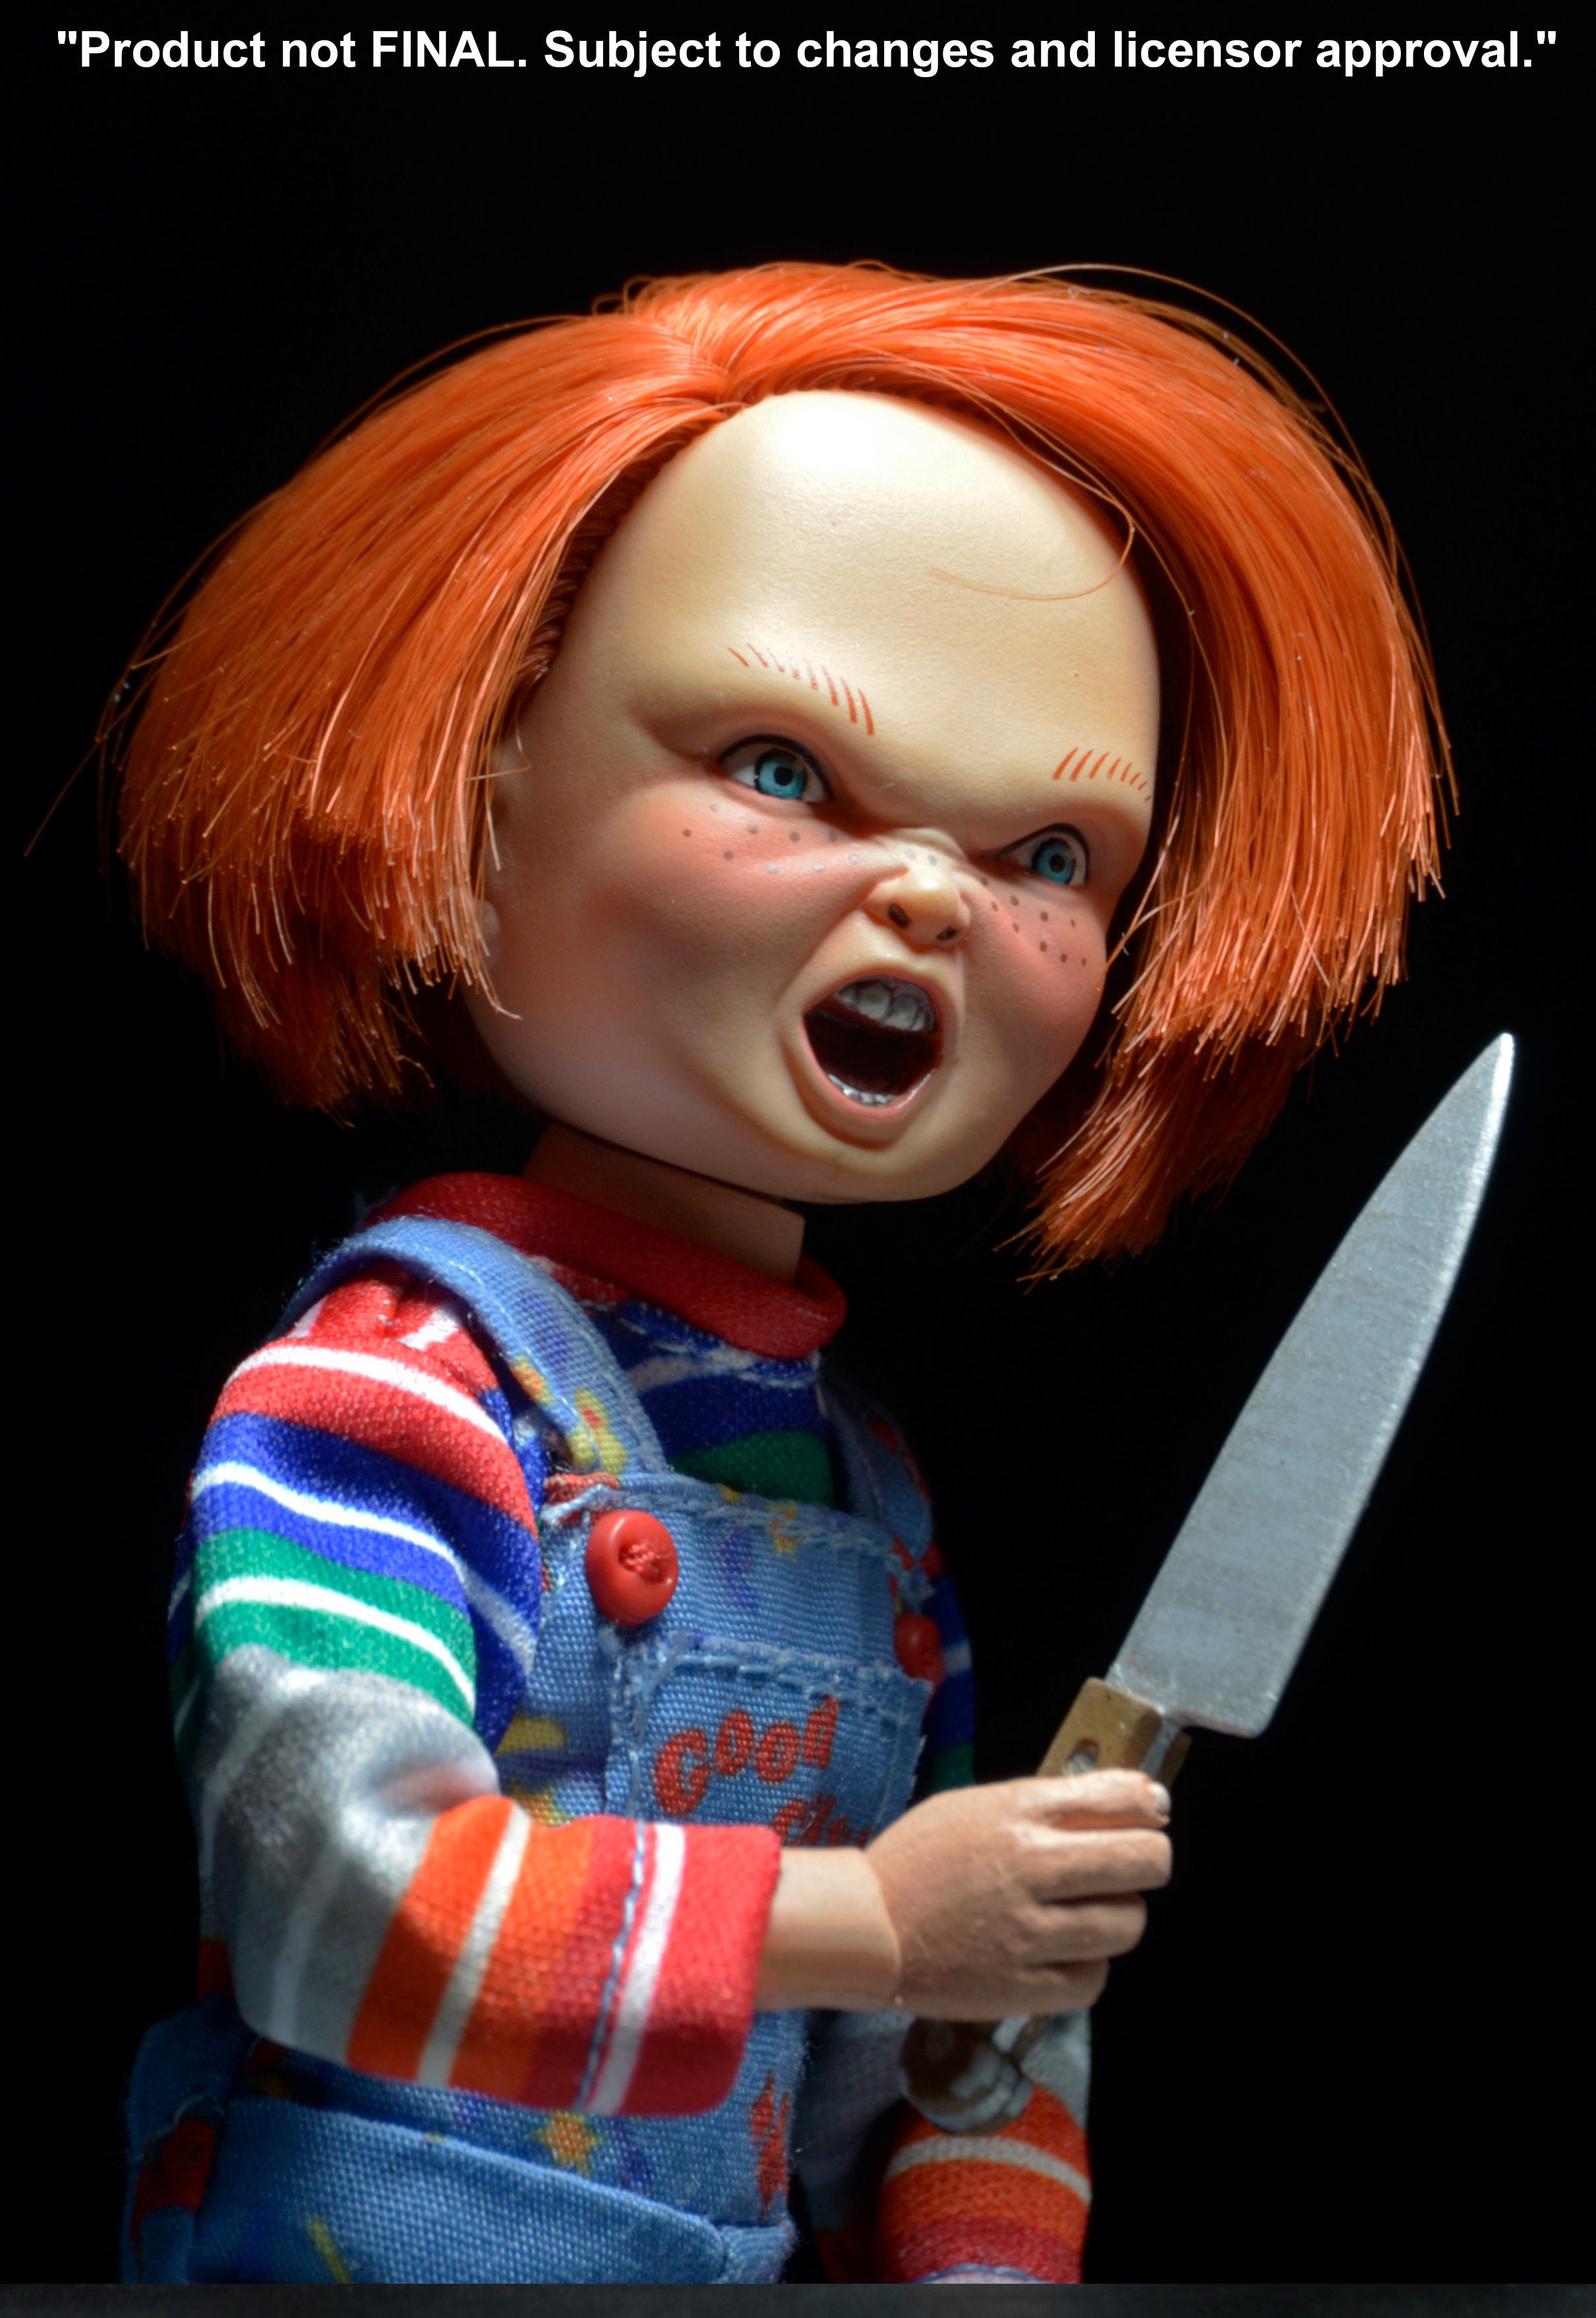 Childs-Play-Chucky-8-Inch-Cloth-Retro-Action-Figure-03